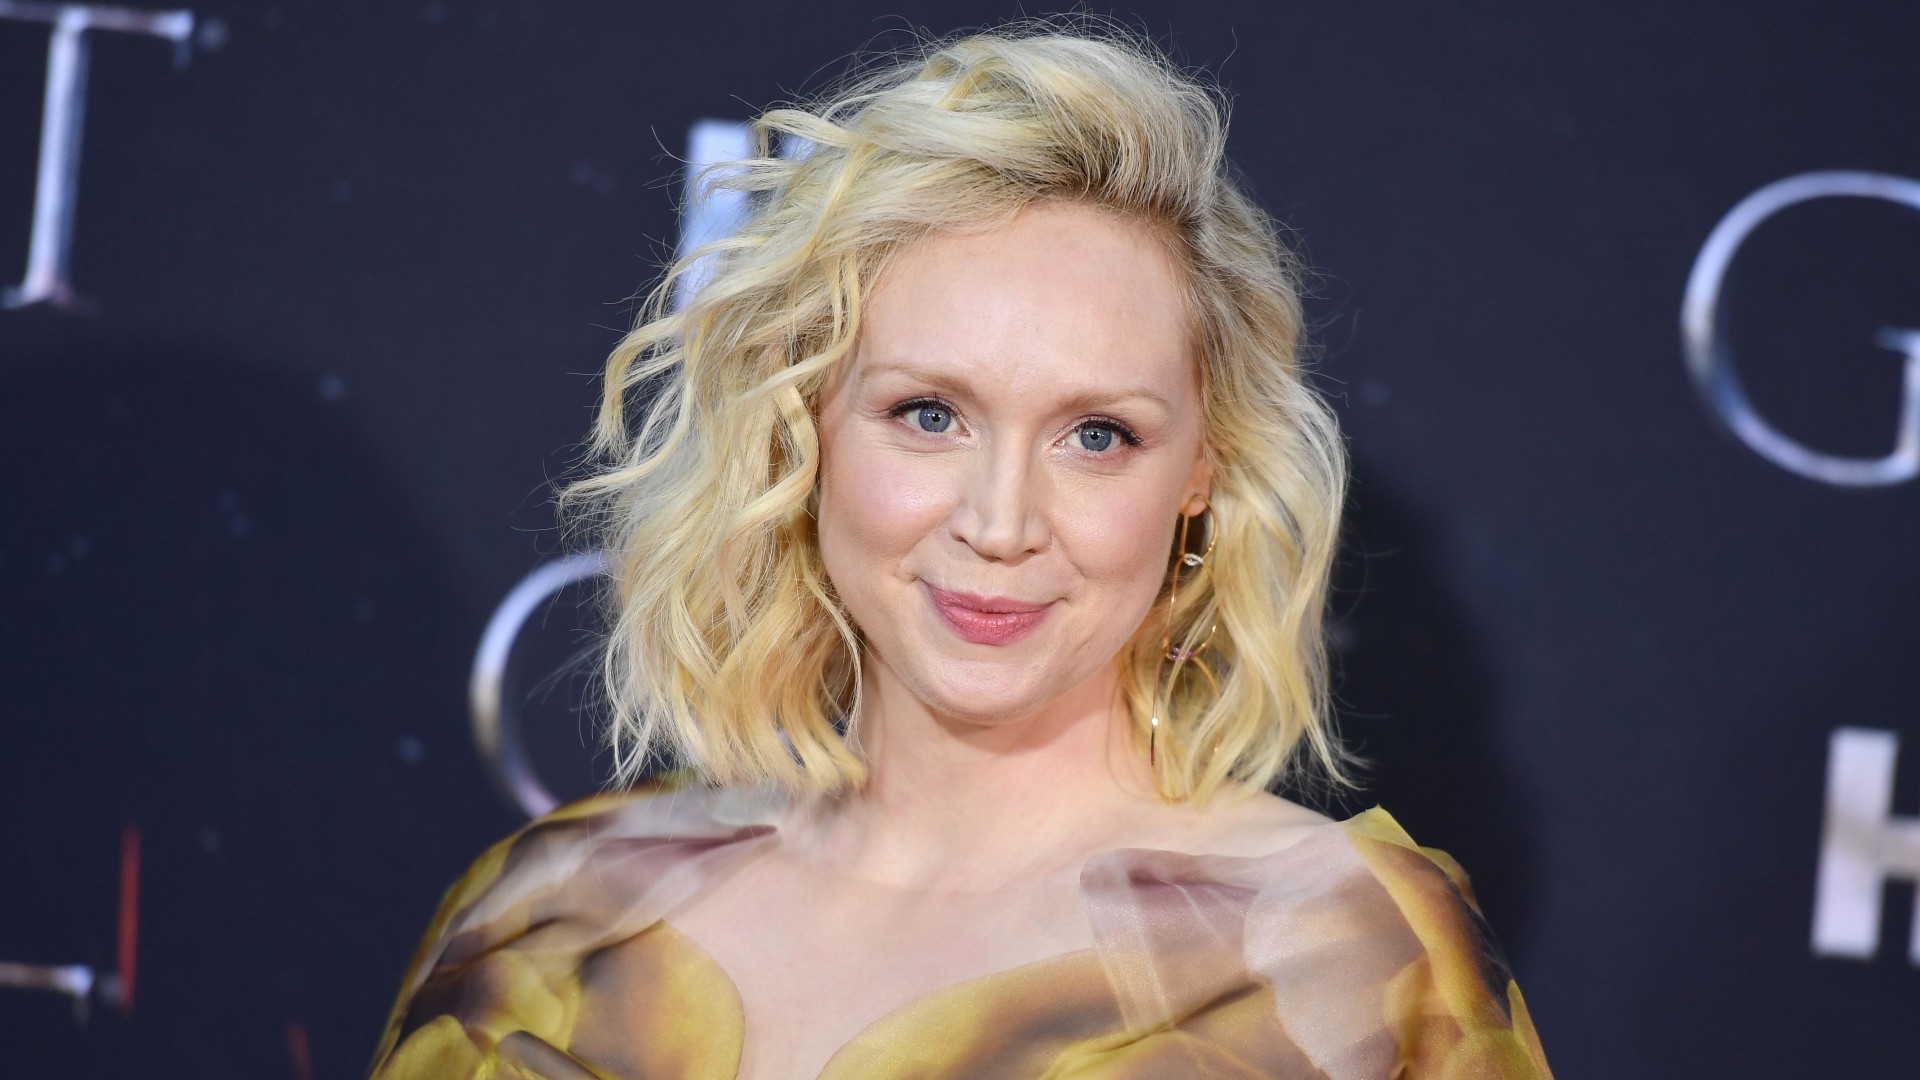 10 Things You May Not Know About Gwendoline Christie